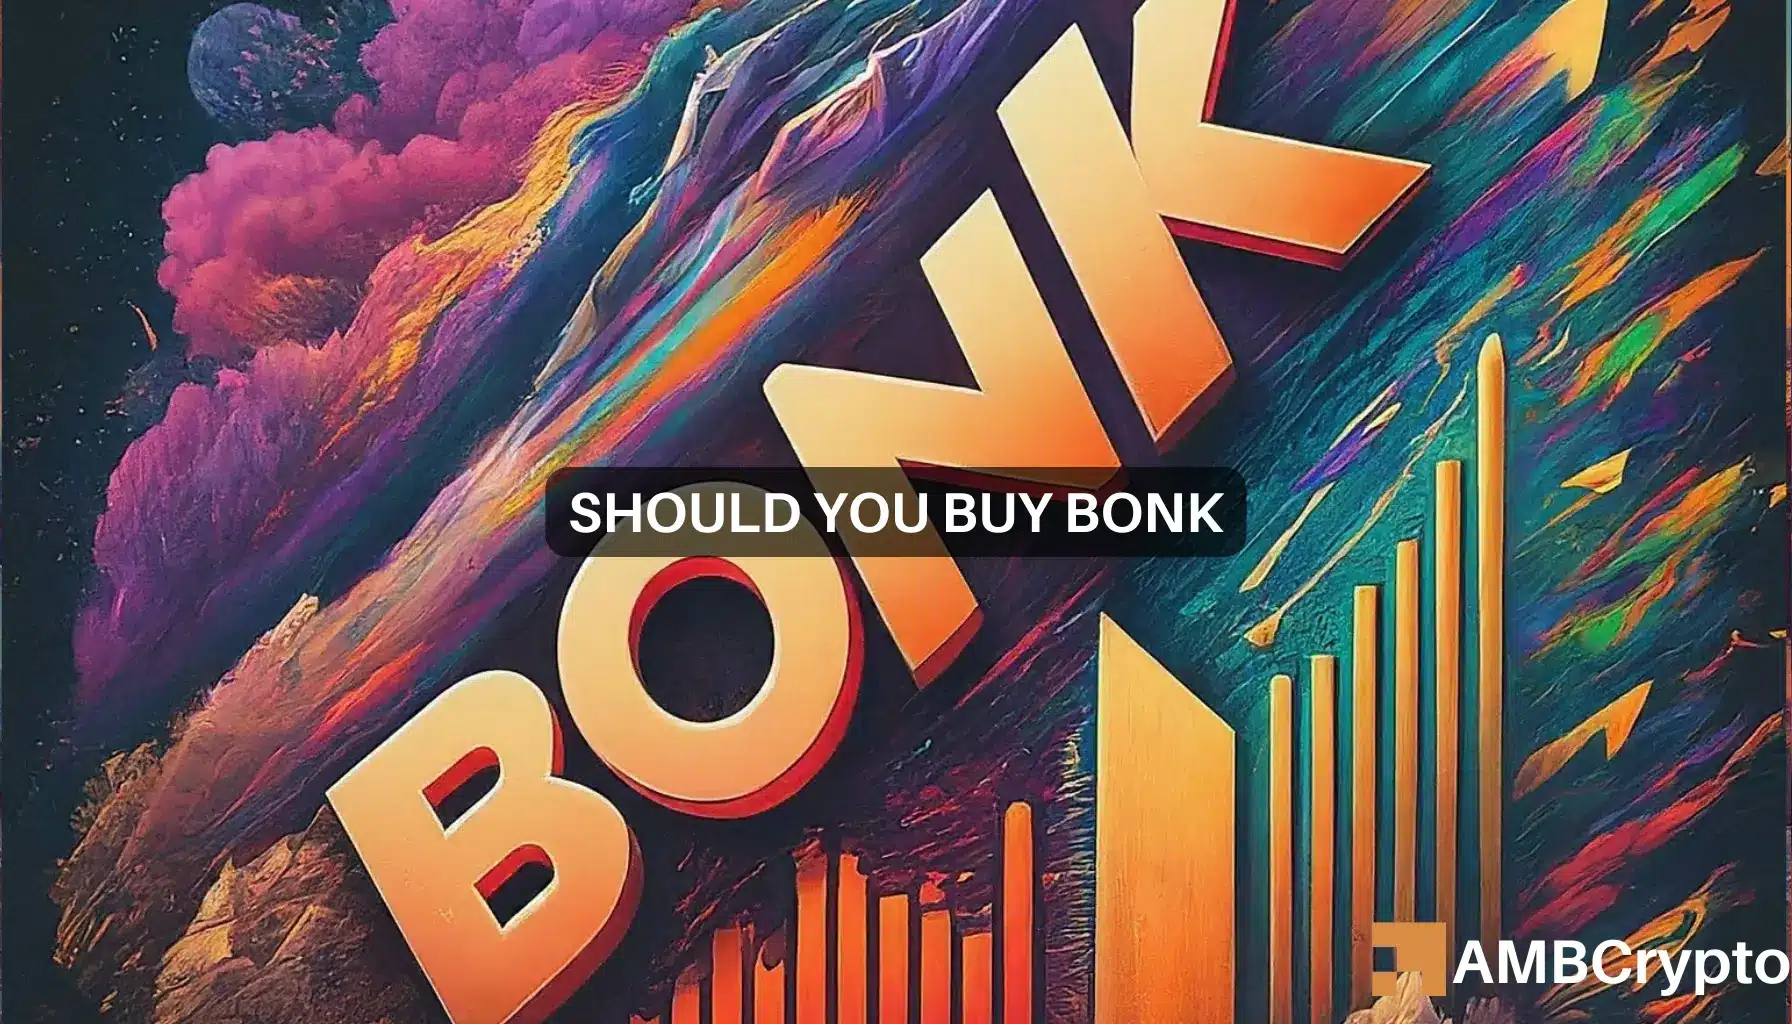 BONK market cap surges past $2B, but traders need to be careful`